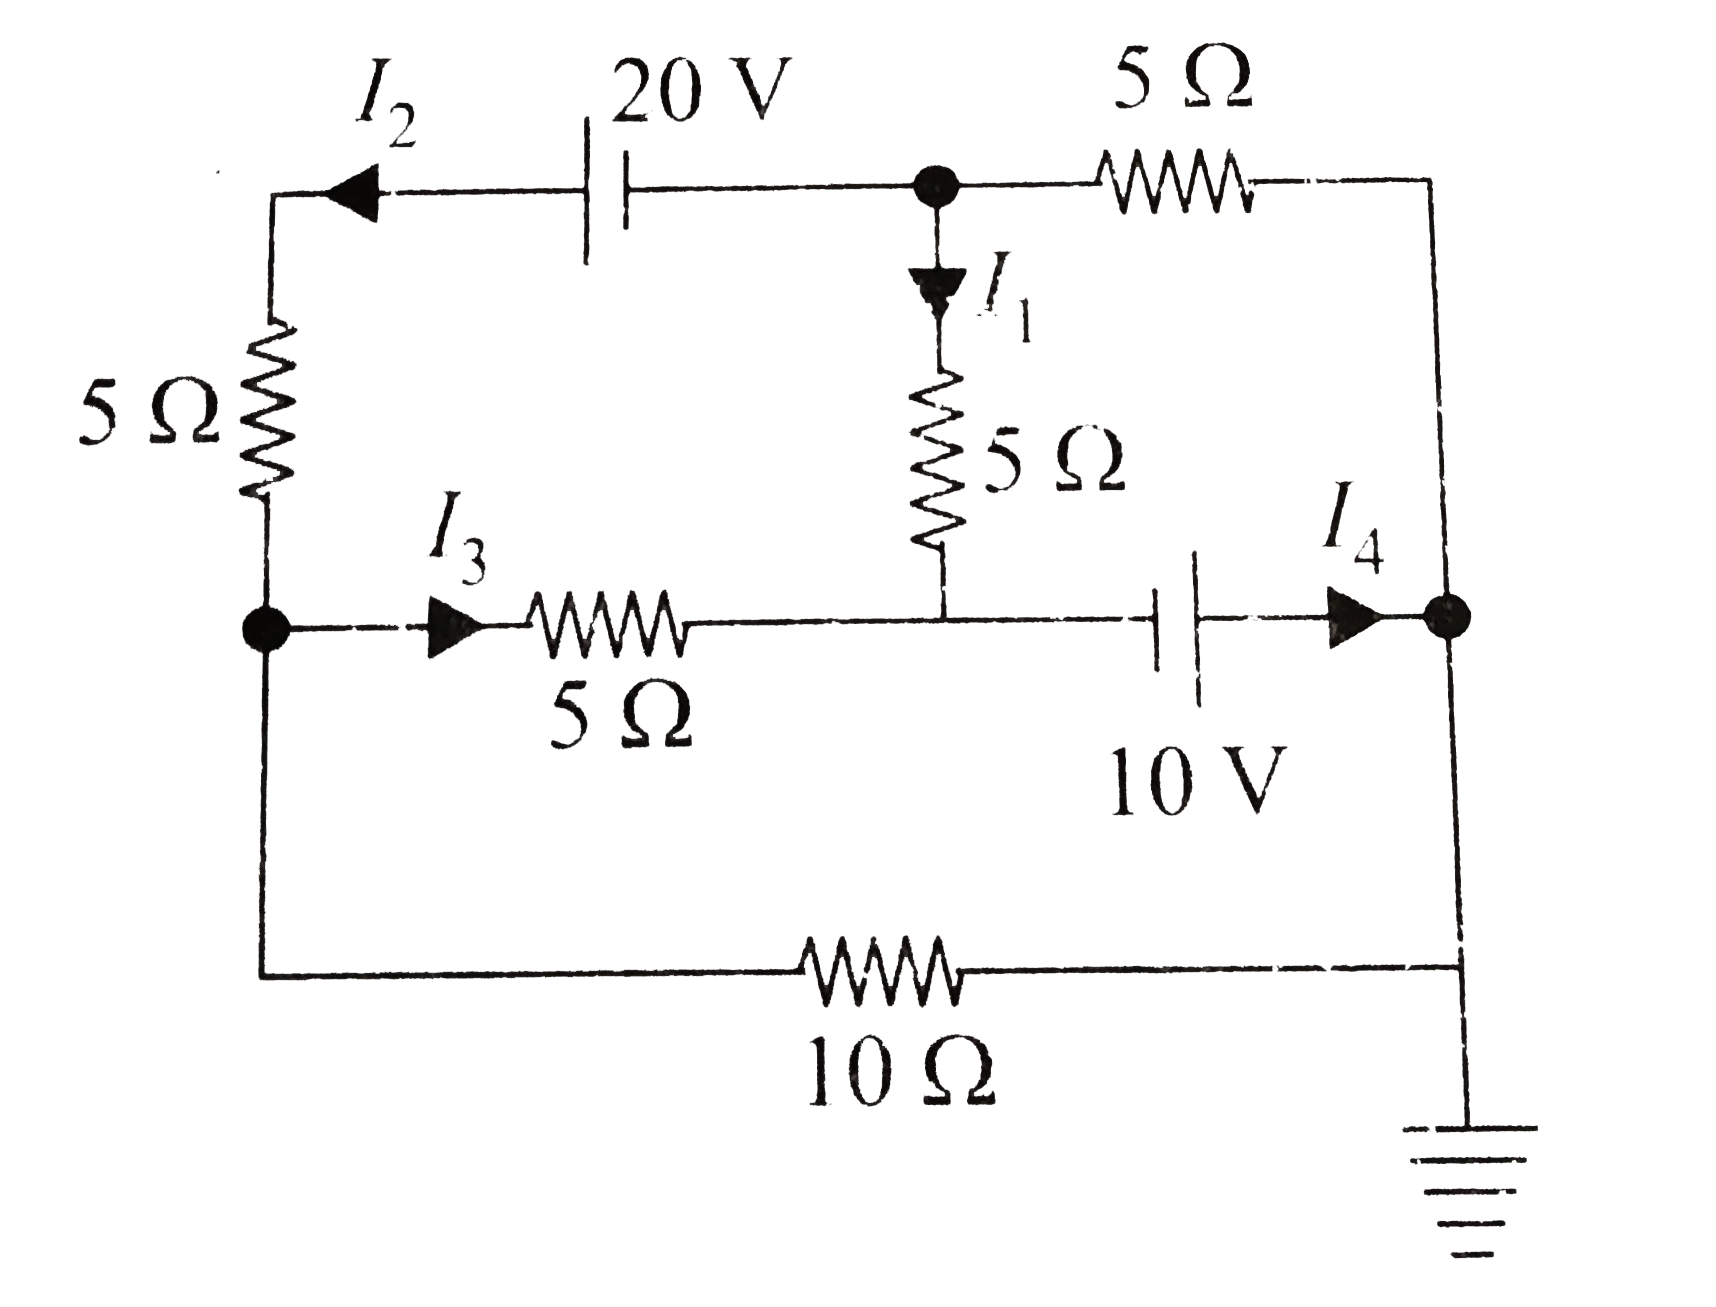 In the circuit shown in the figure   .    The value of current I1 is